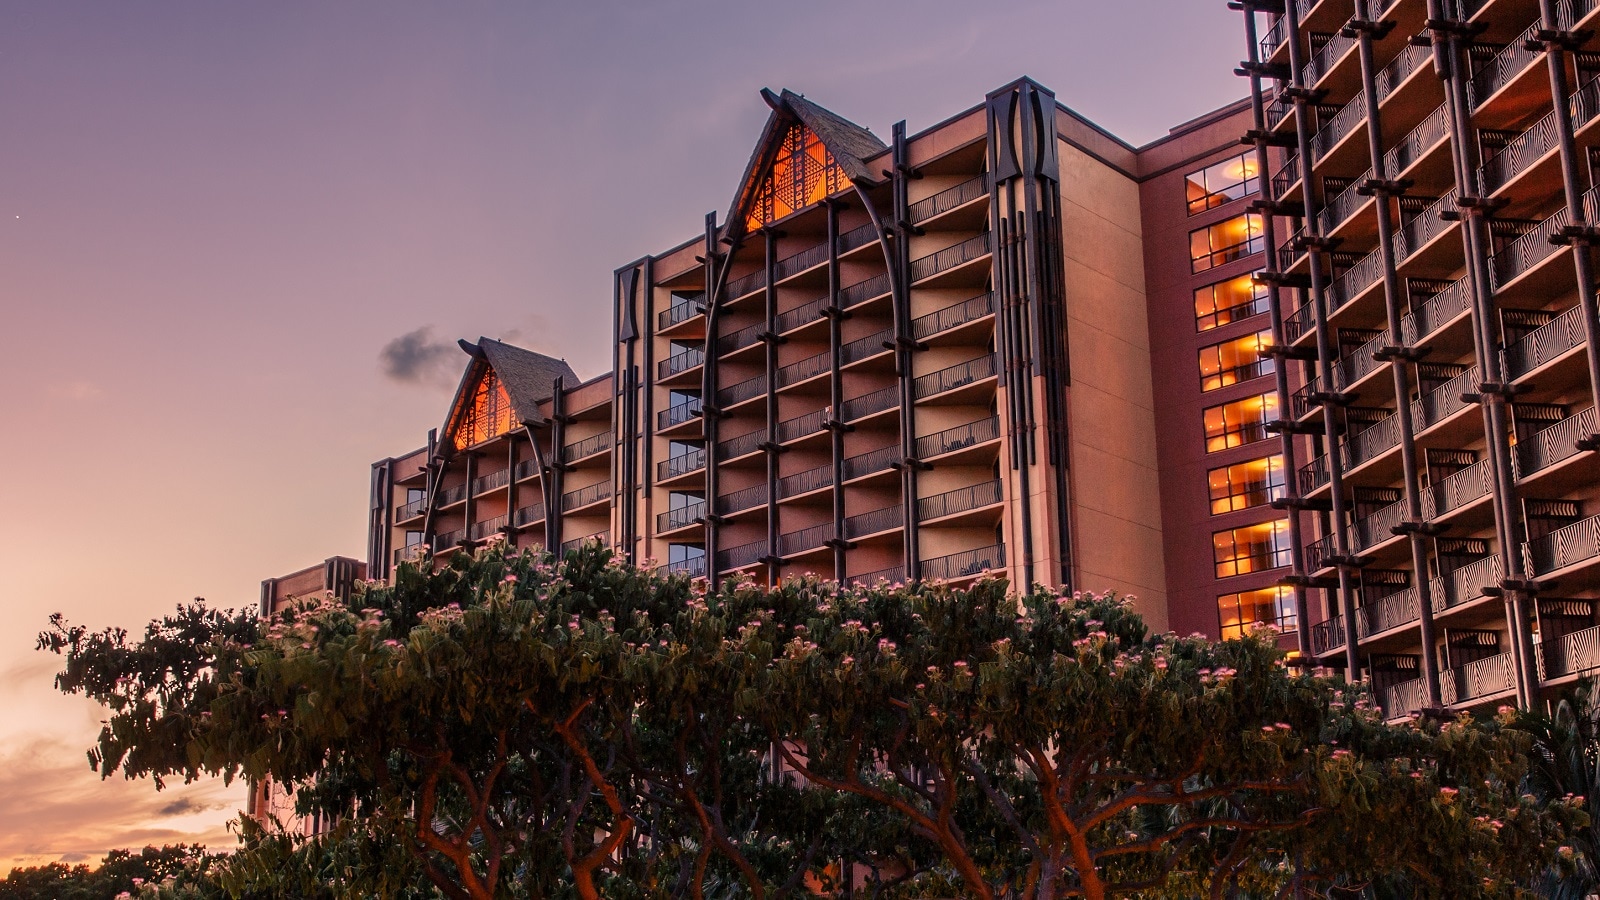 The towers of Aulani Resort & Spa as seen at twilight with a flowering tree in the foreground